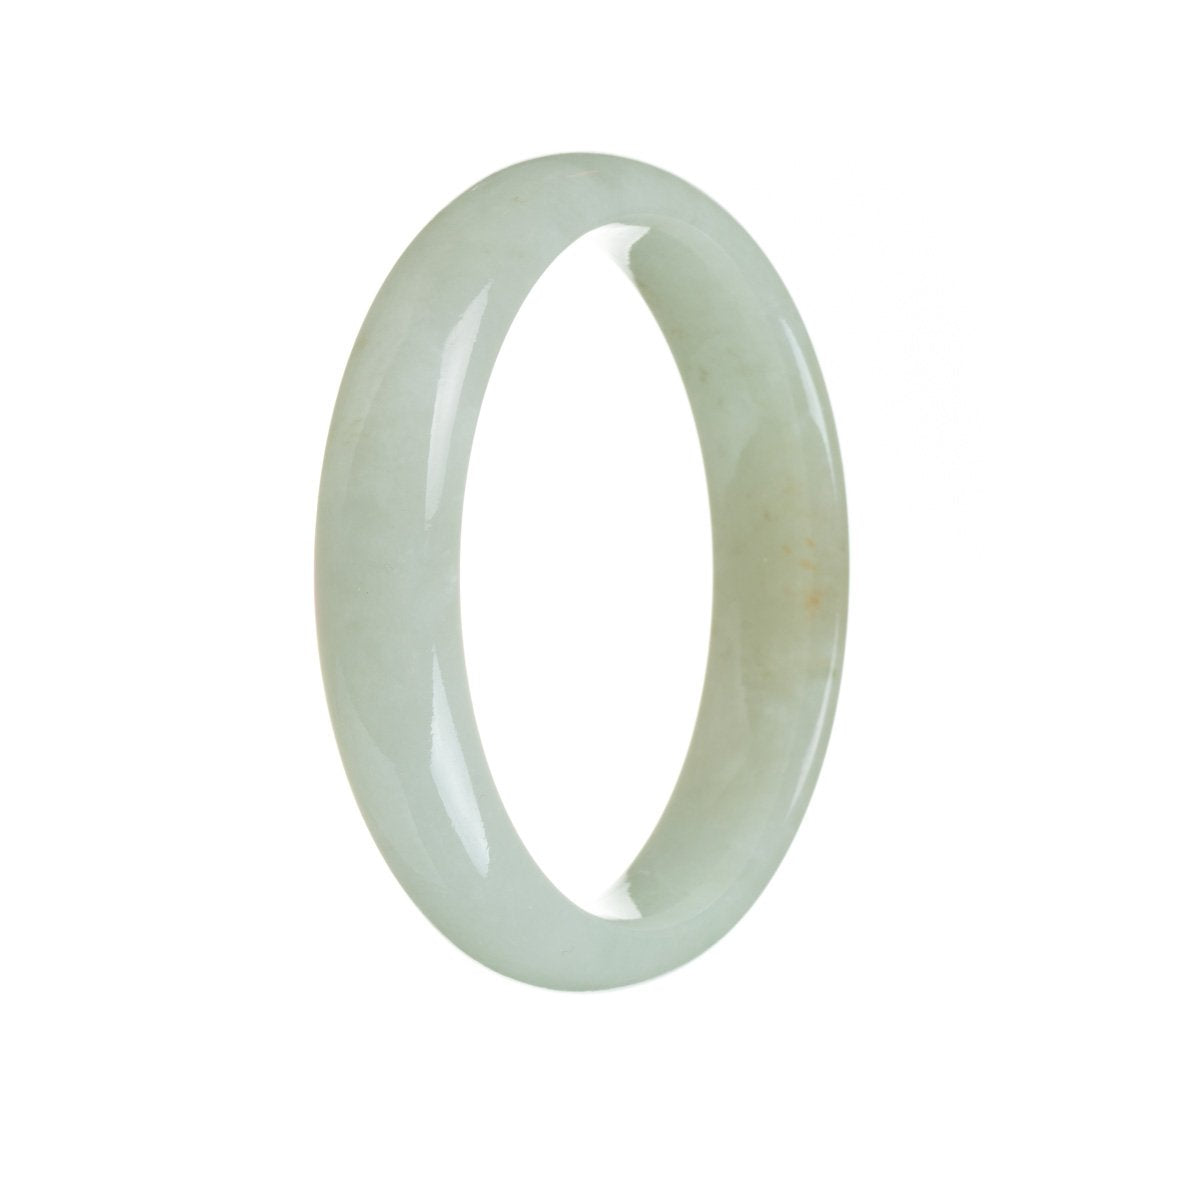 A close-up photo of a white jade bangle bracelet with a half-moon shape. It is made of genuine grade A white traditional jade and measures 56mm in diameter. The bracelet is beautifully crafted and is a product of MAYS™.